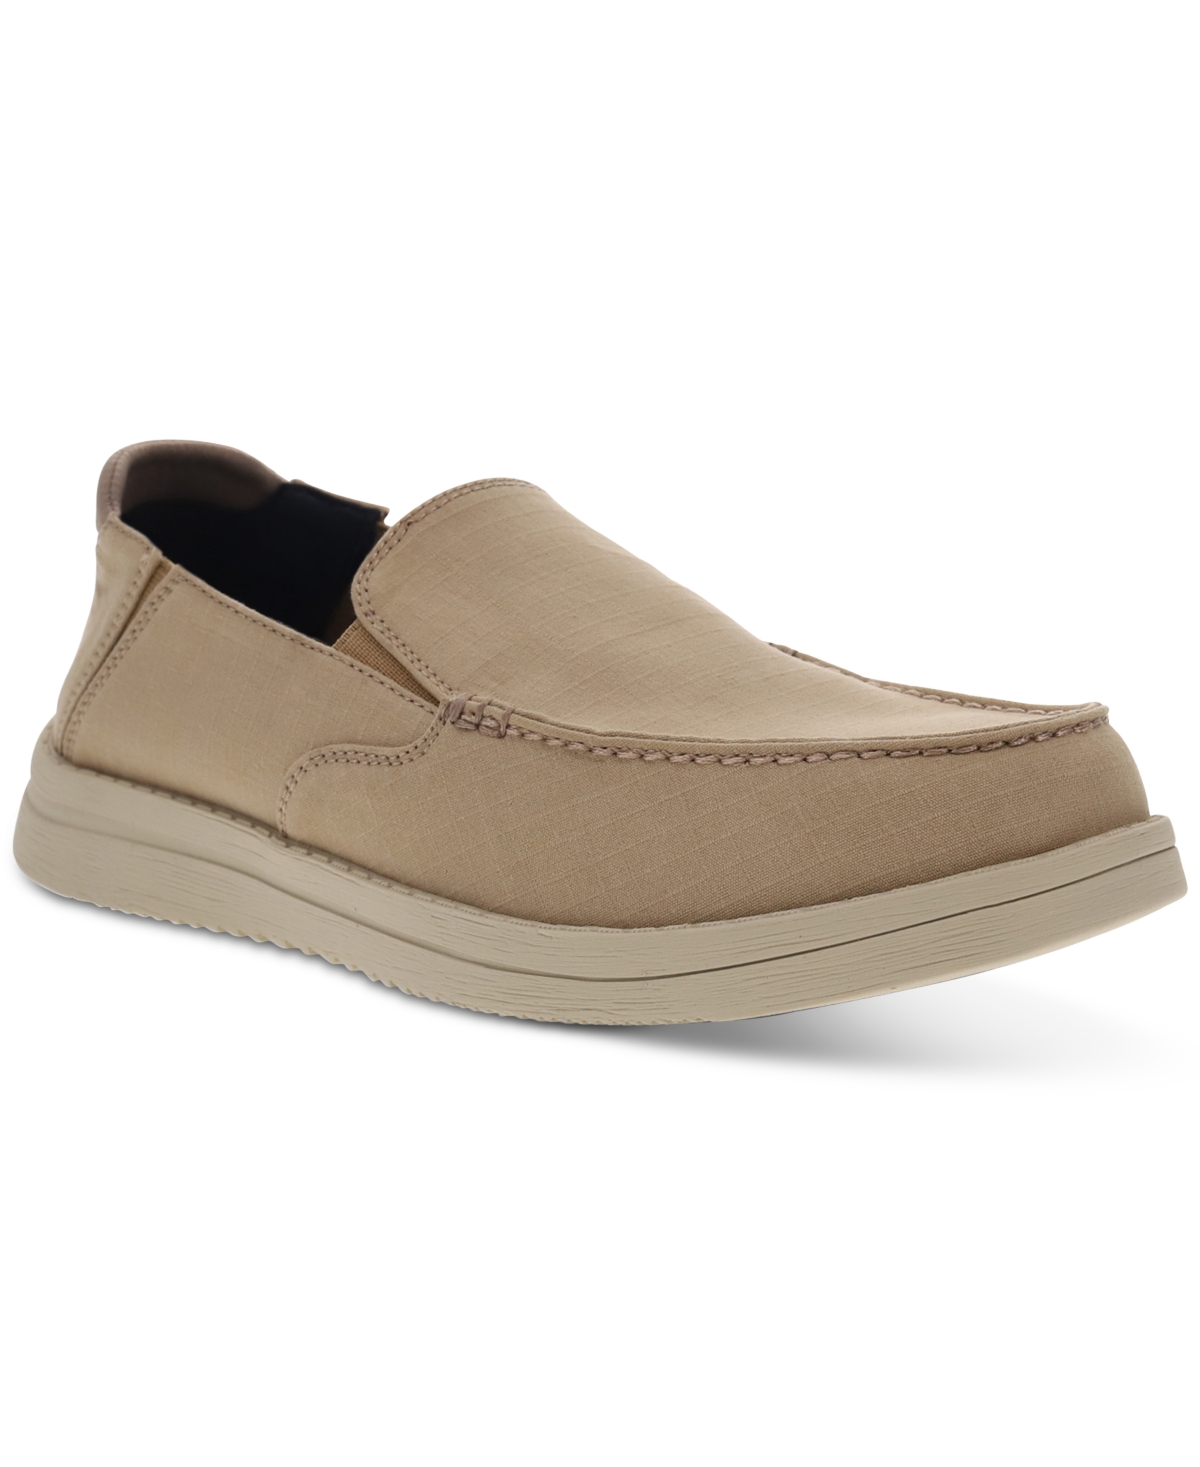 Men's Wiley Casual Twill Ripstop Loafers - Khaki